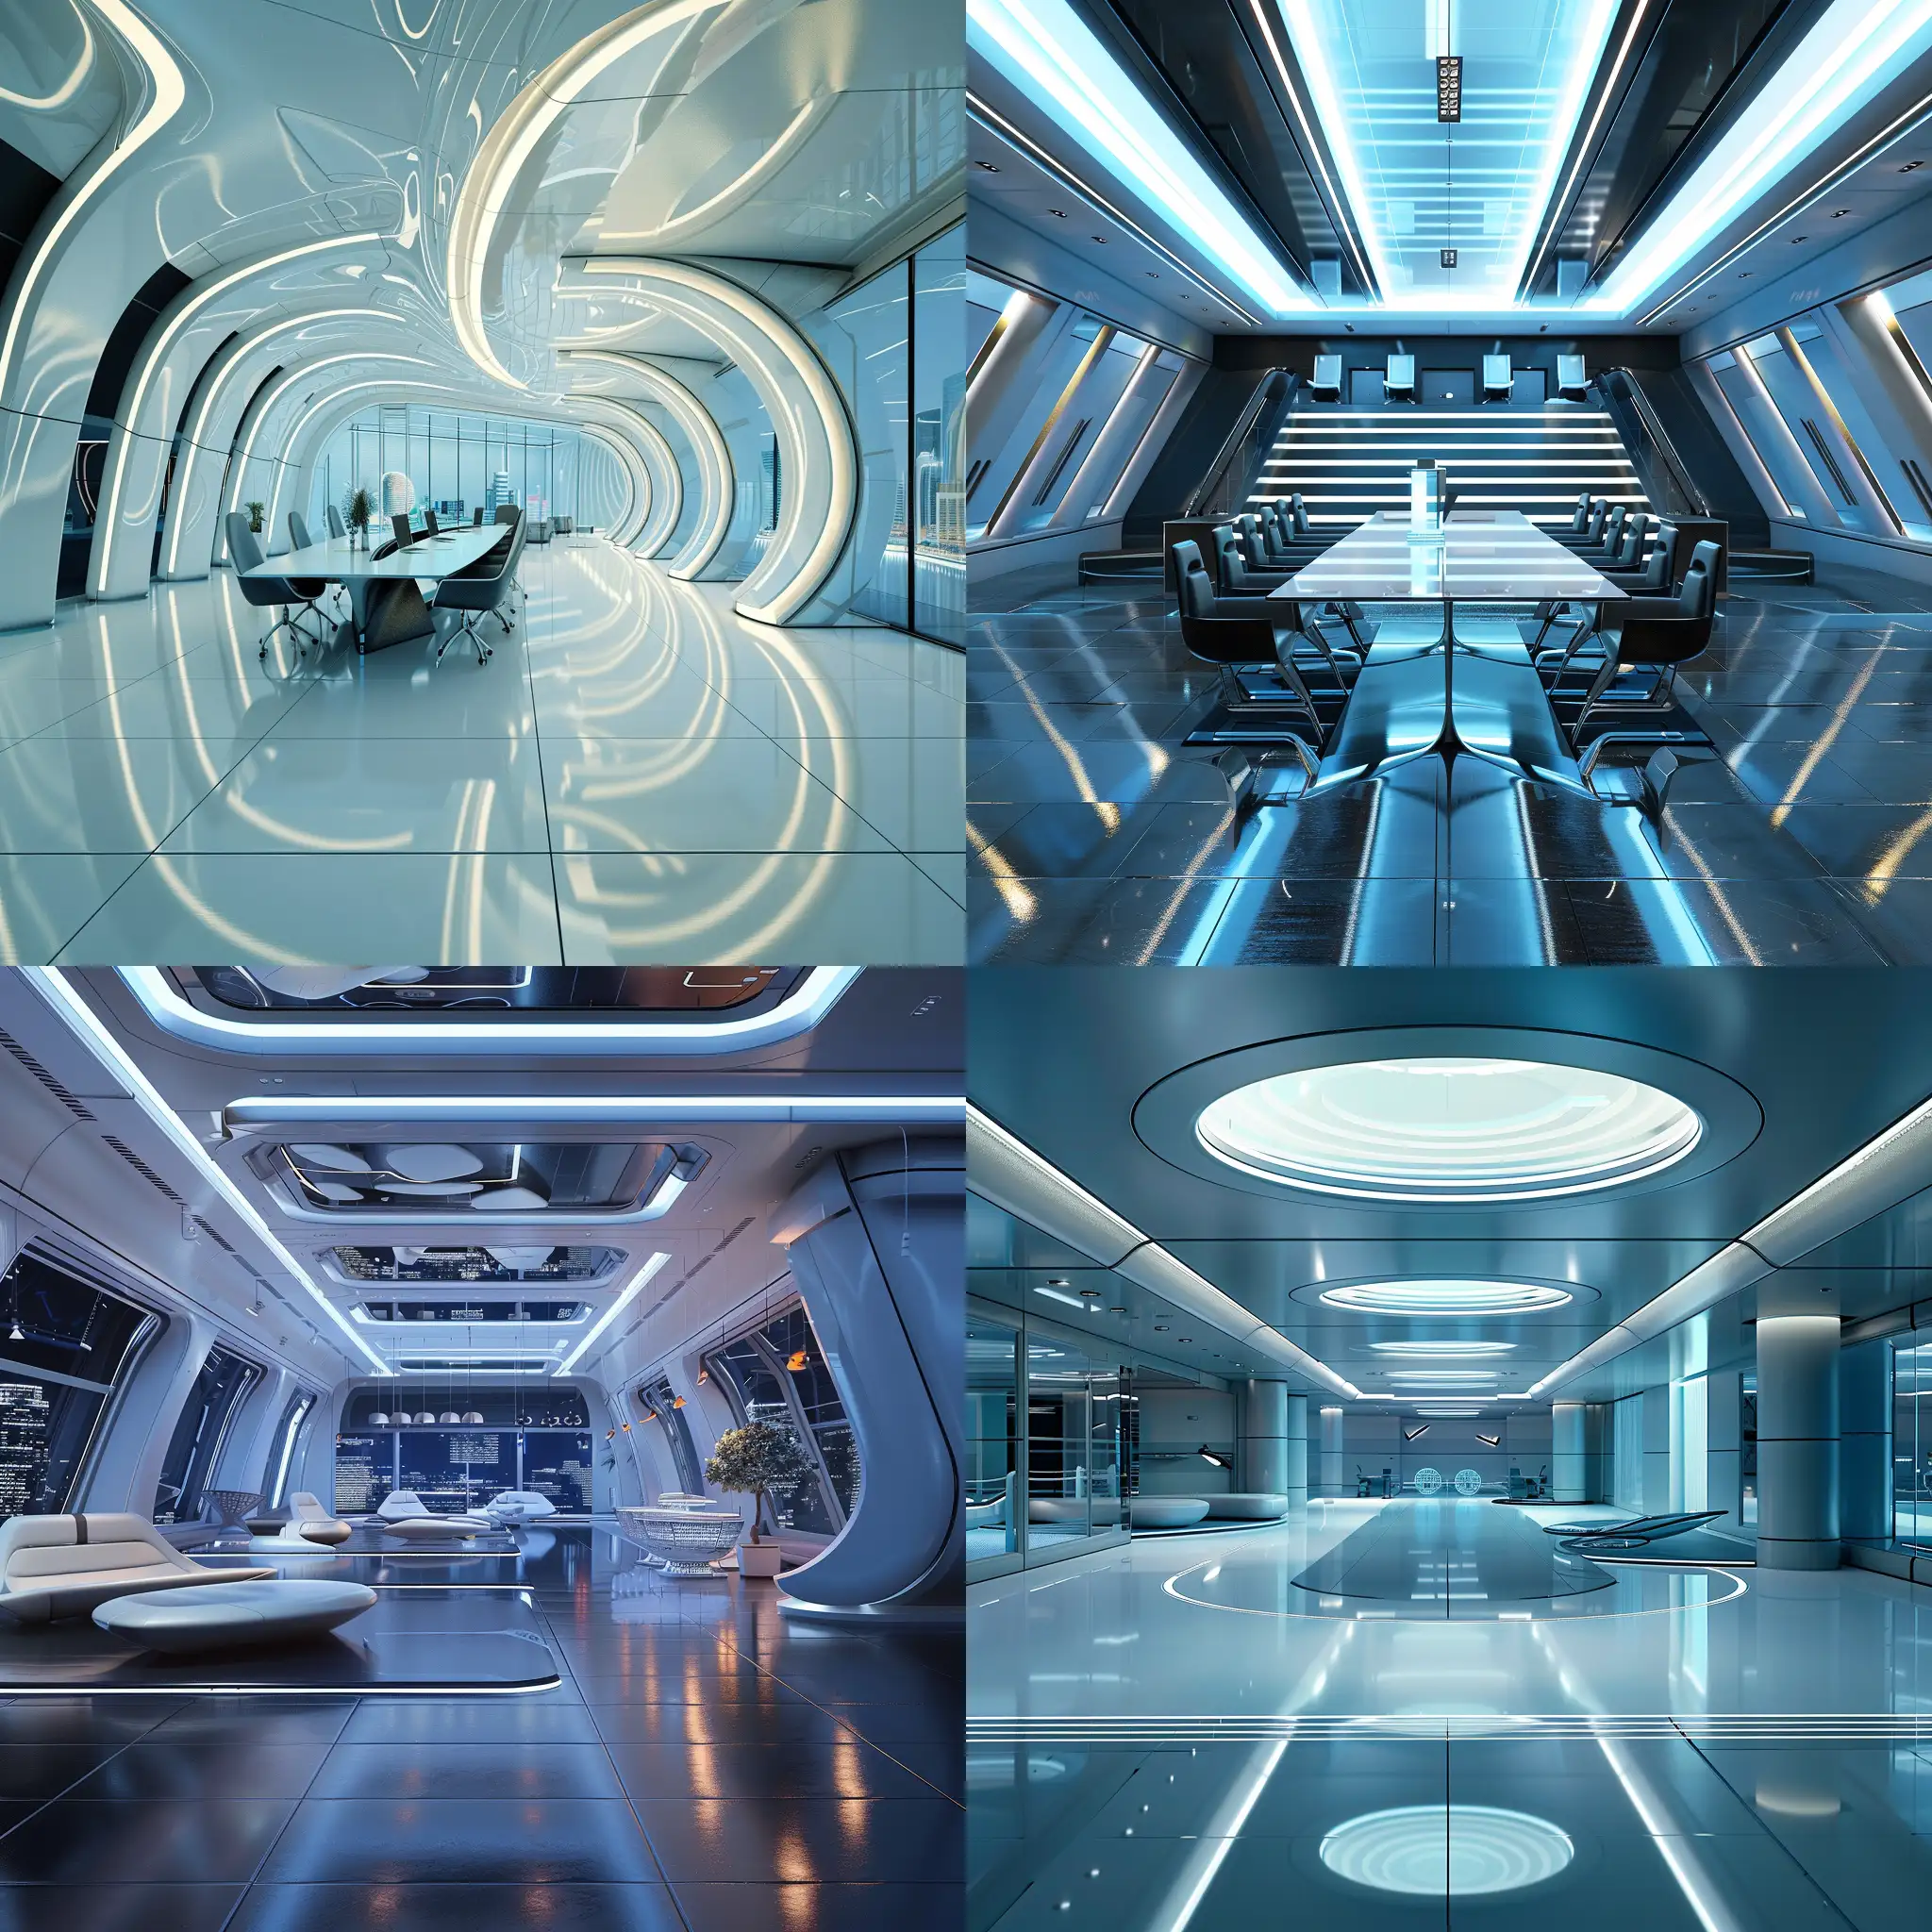 Futuristic-Business-Environment-with-Advanced-Technology-and-Sleek-Design